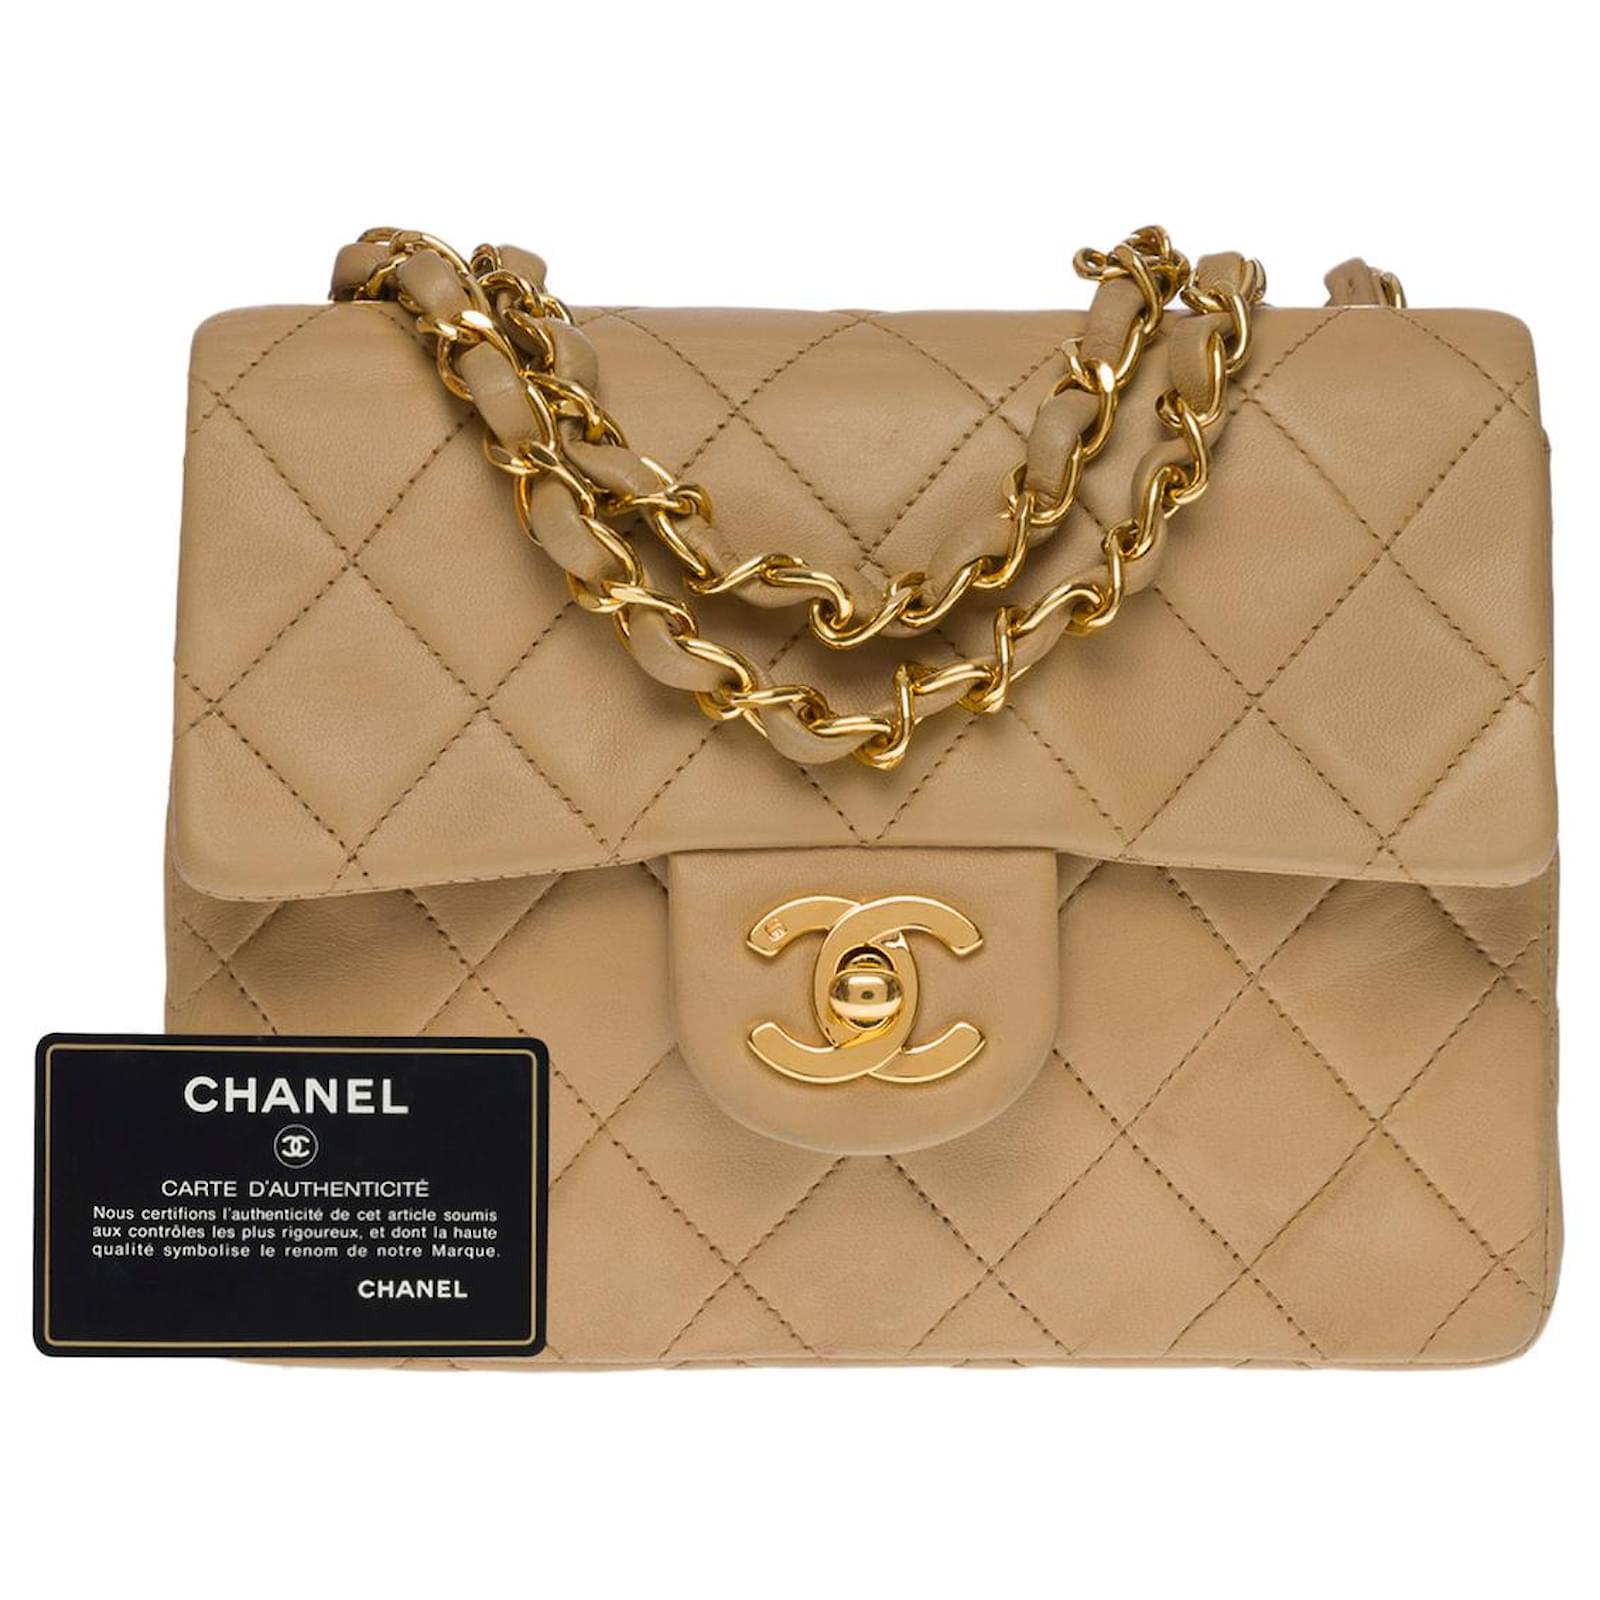 Vintage Chanel classic mini flap bag with leather strap and gold hardware